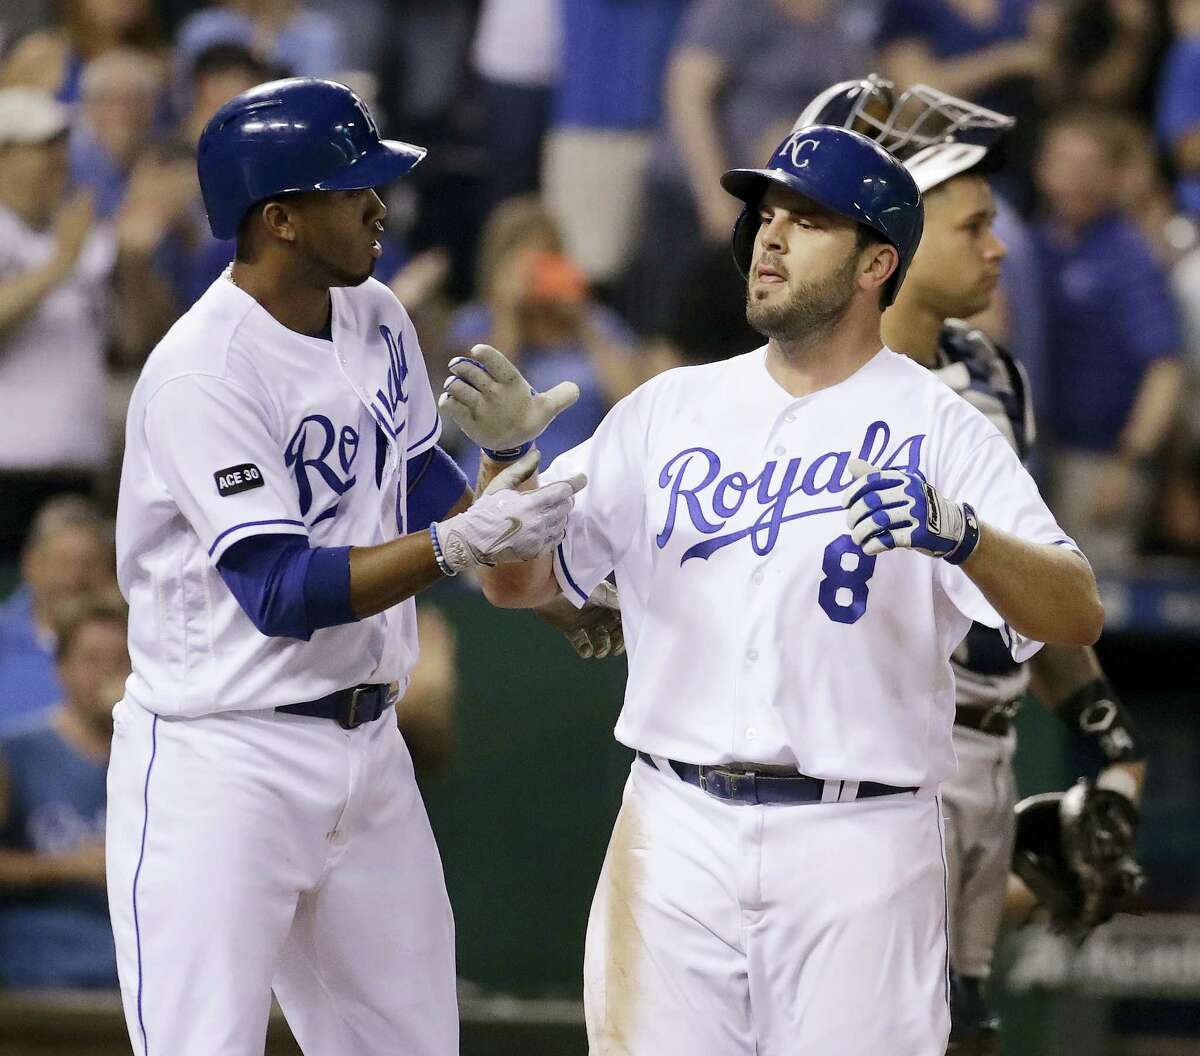 The Royals’ Mike Moustakas (8) celebrates with Alcides Escobar after hitting a three-run home run in the fifth inning Thursday.